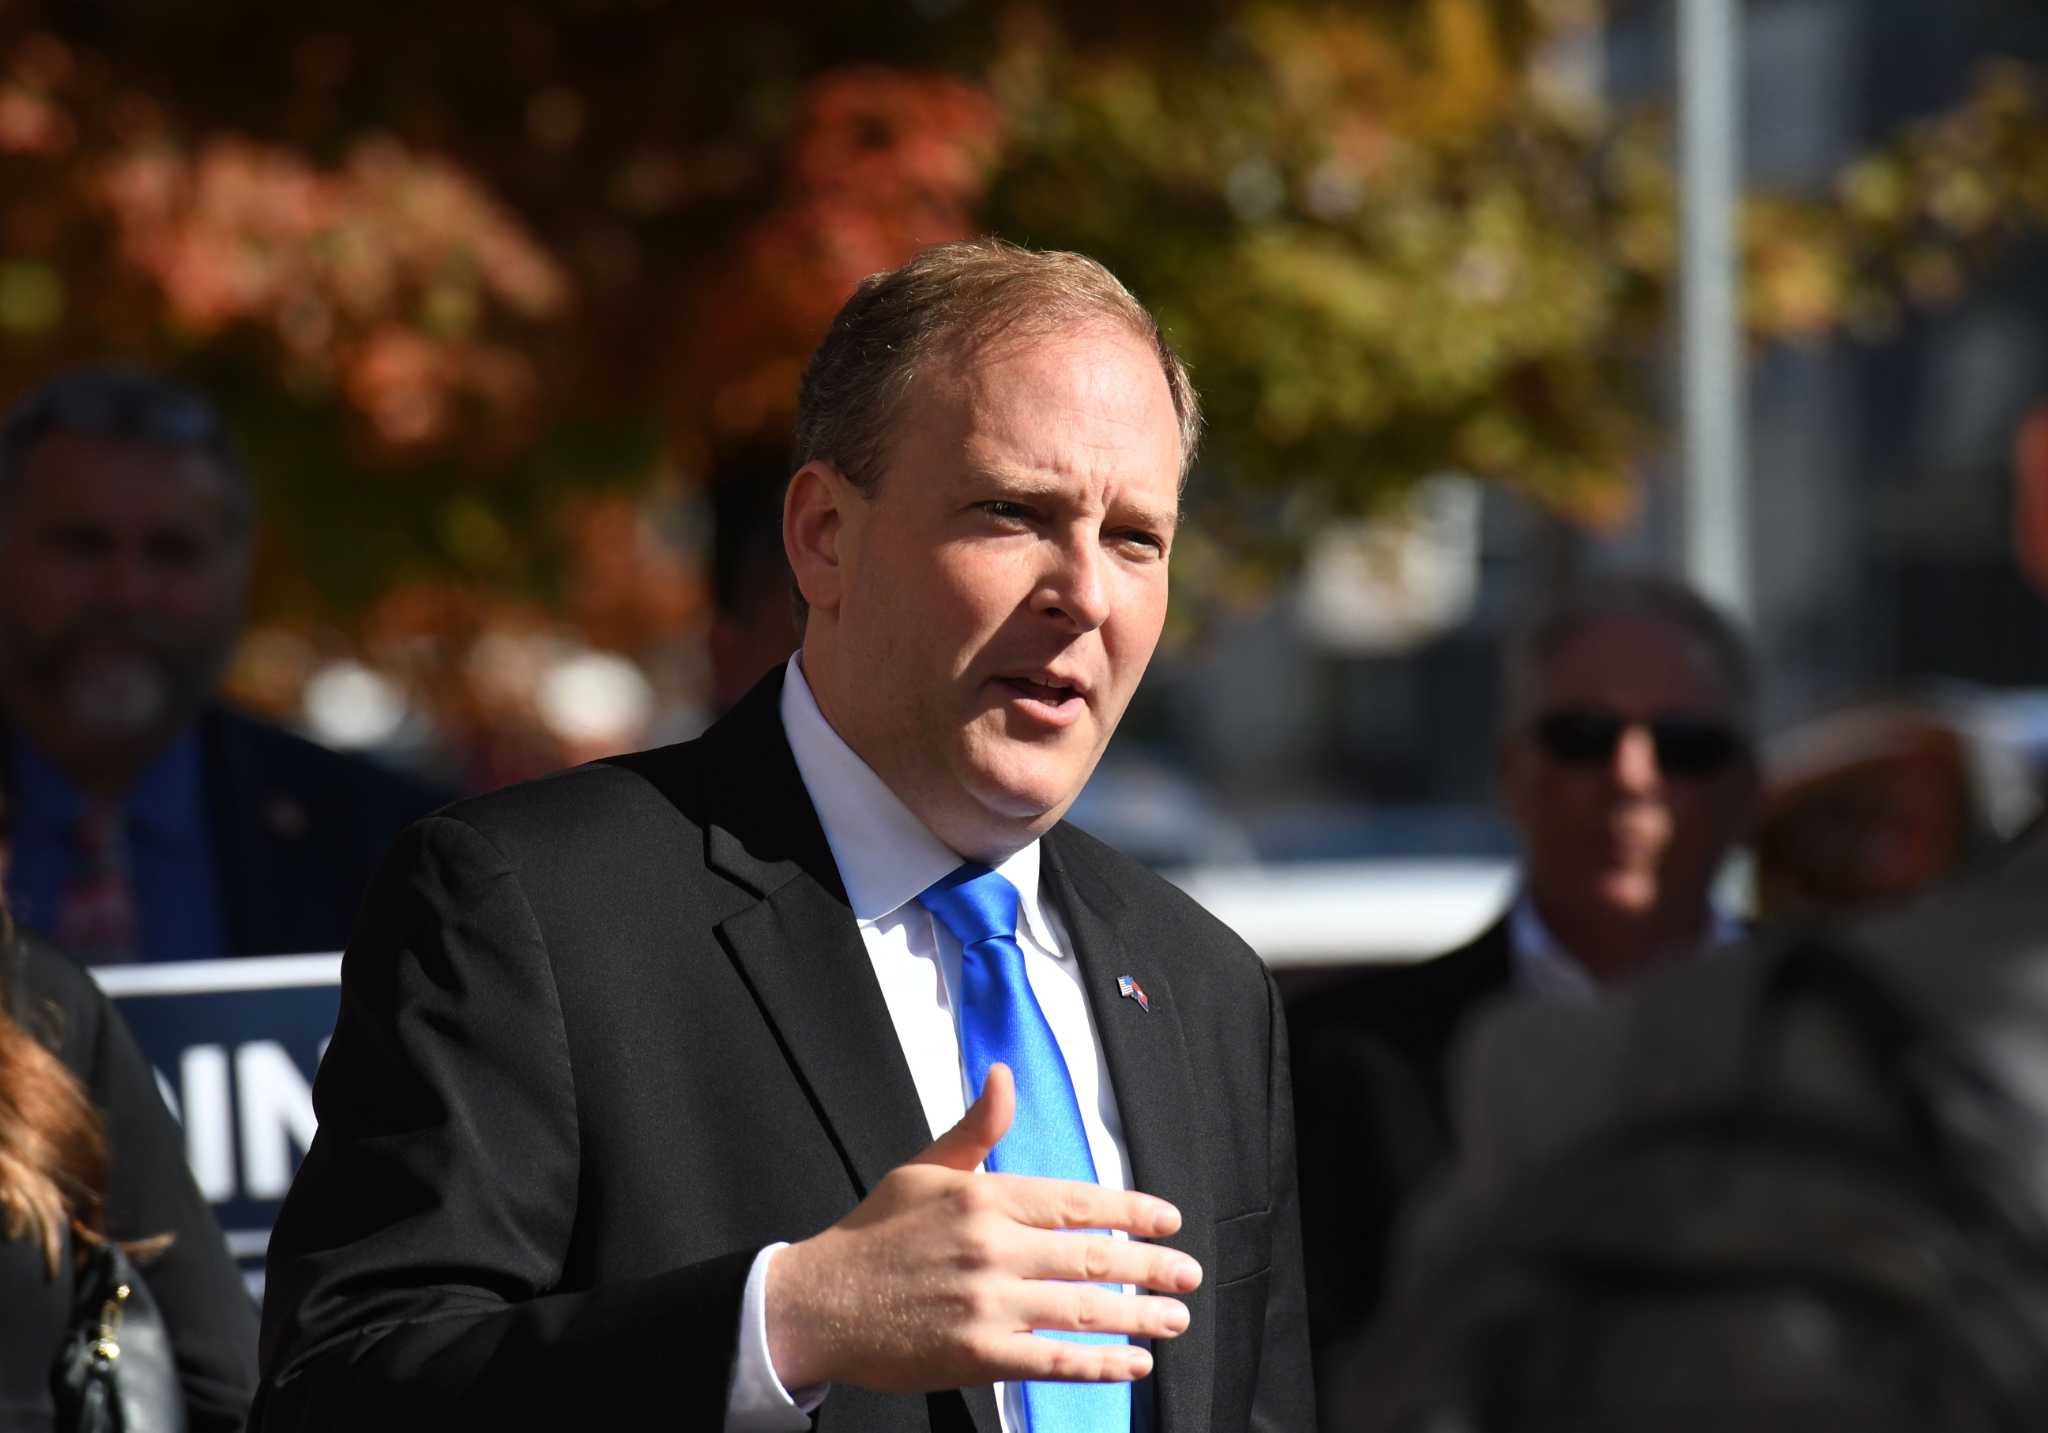 Zeldin concedes to Hochul in closest governor's race since 1994